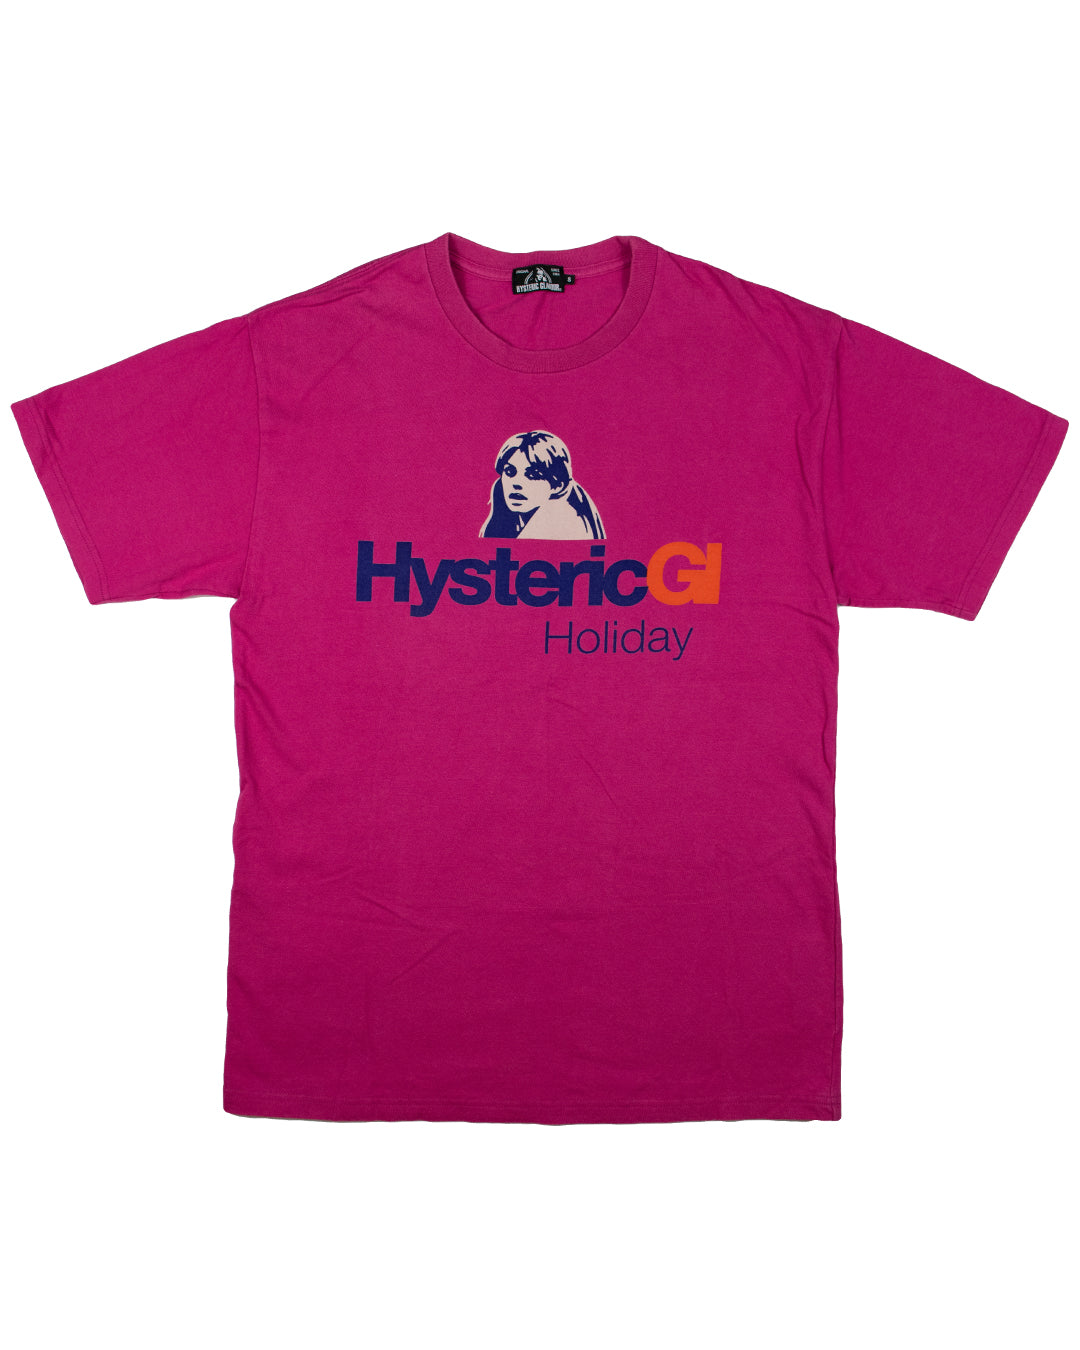 Hysteric Glamour Holiday Tee